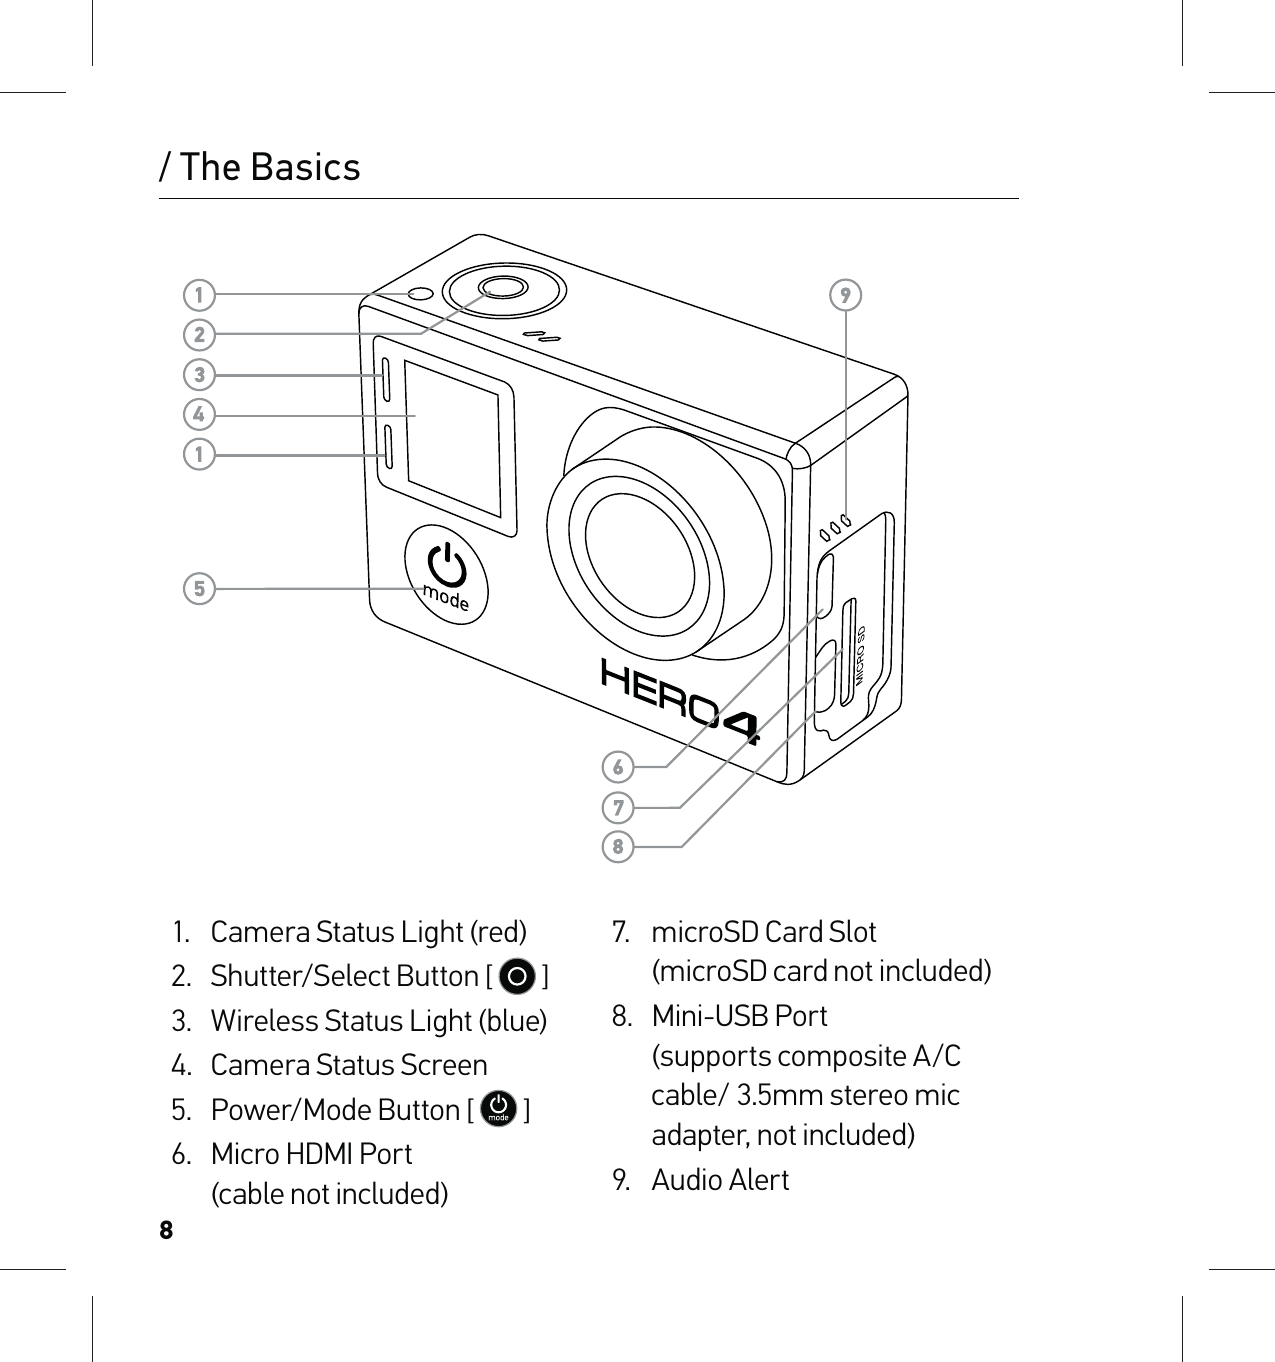 81.  Camera Status Light (red)2.  Shutter/Select Button [   ]3.  Wireless Status Light (blue)4.  Camera Status Screen5.  Power/Mode Button [   ]6.  Micro HDMI Port  (cable not included)7.  microSD Card Slot  (microSD card not included)8. Mini-USB Port  (supports composite A/C cable/ 3.5mm stereo mic adapter, not included)9. Audio Alert/ The Basics